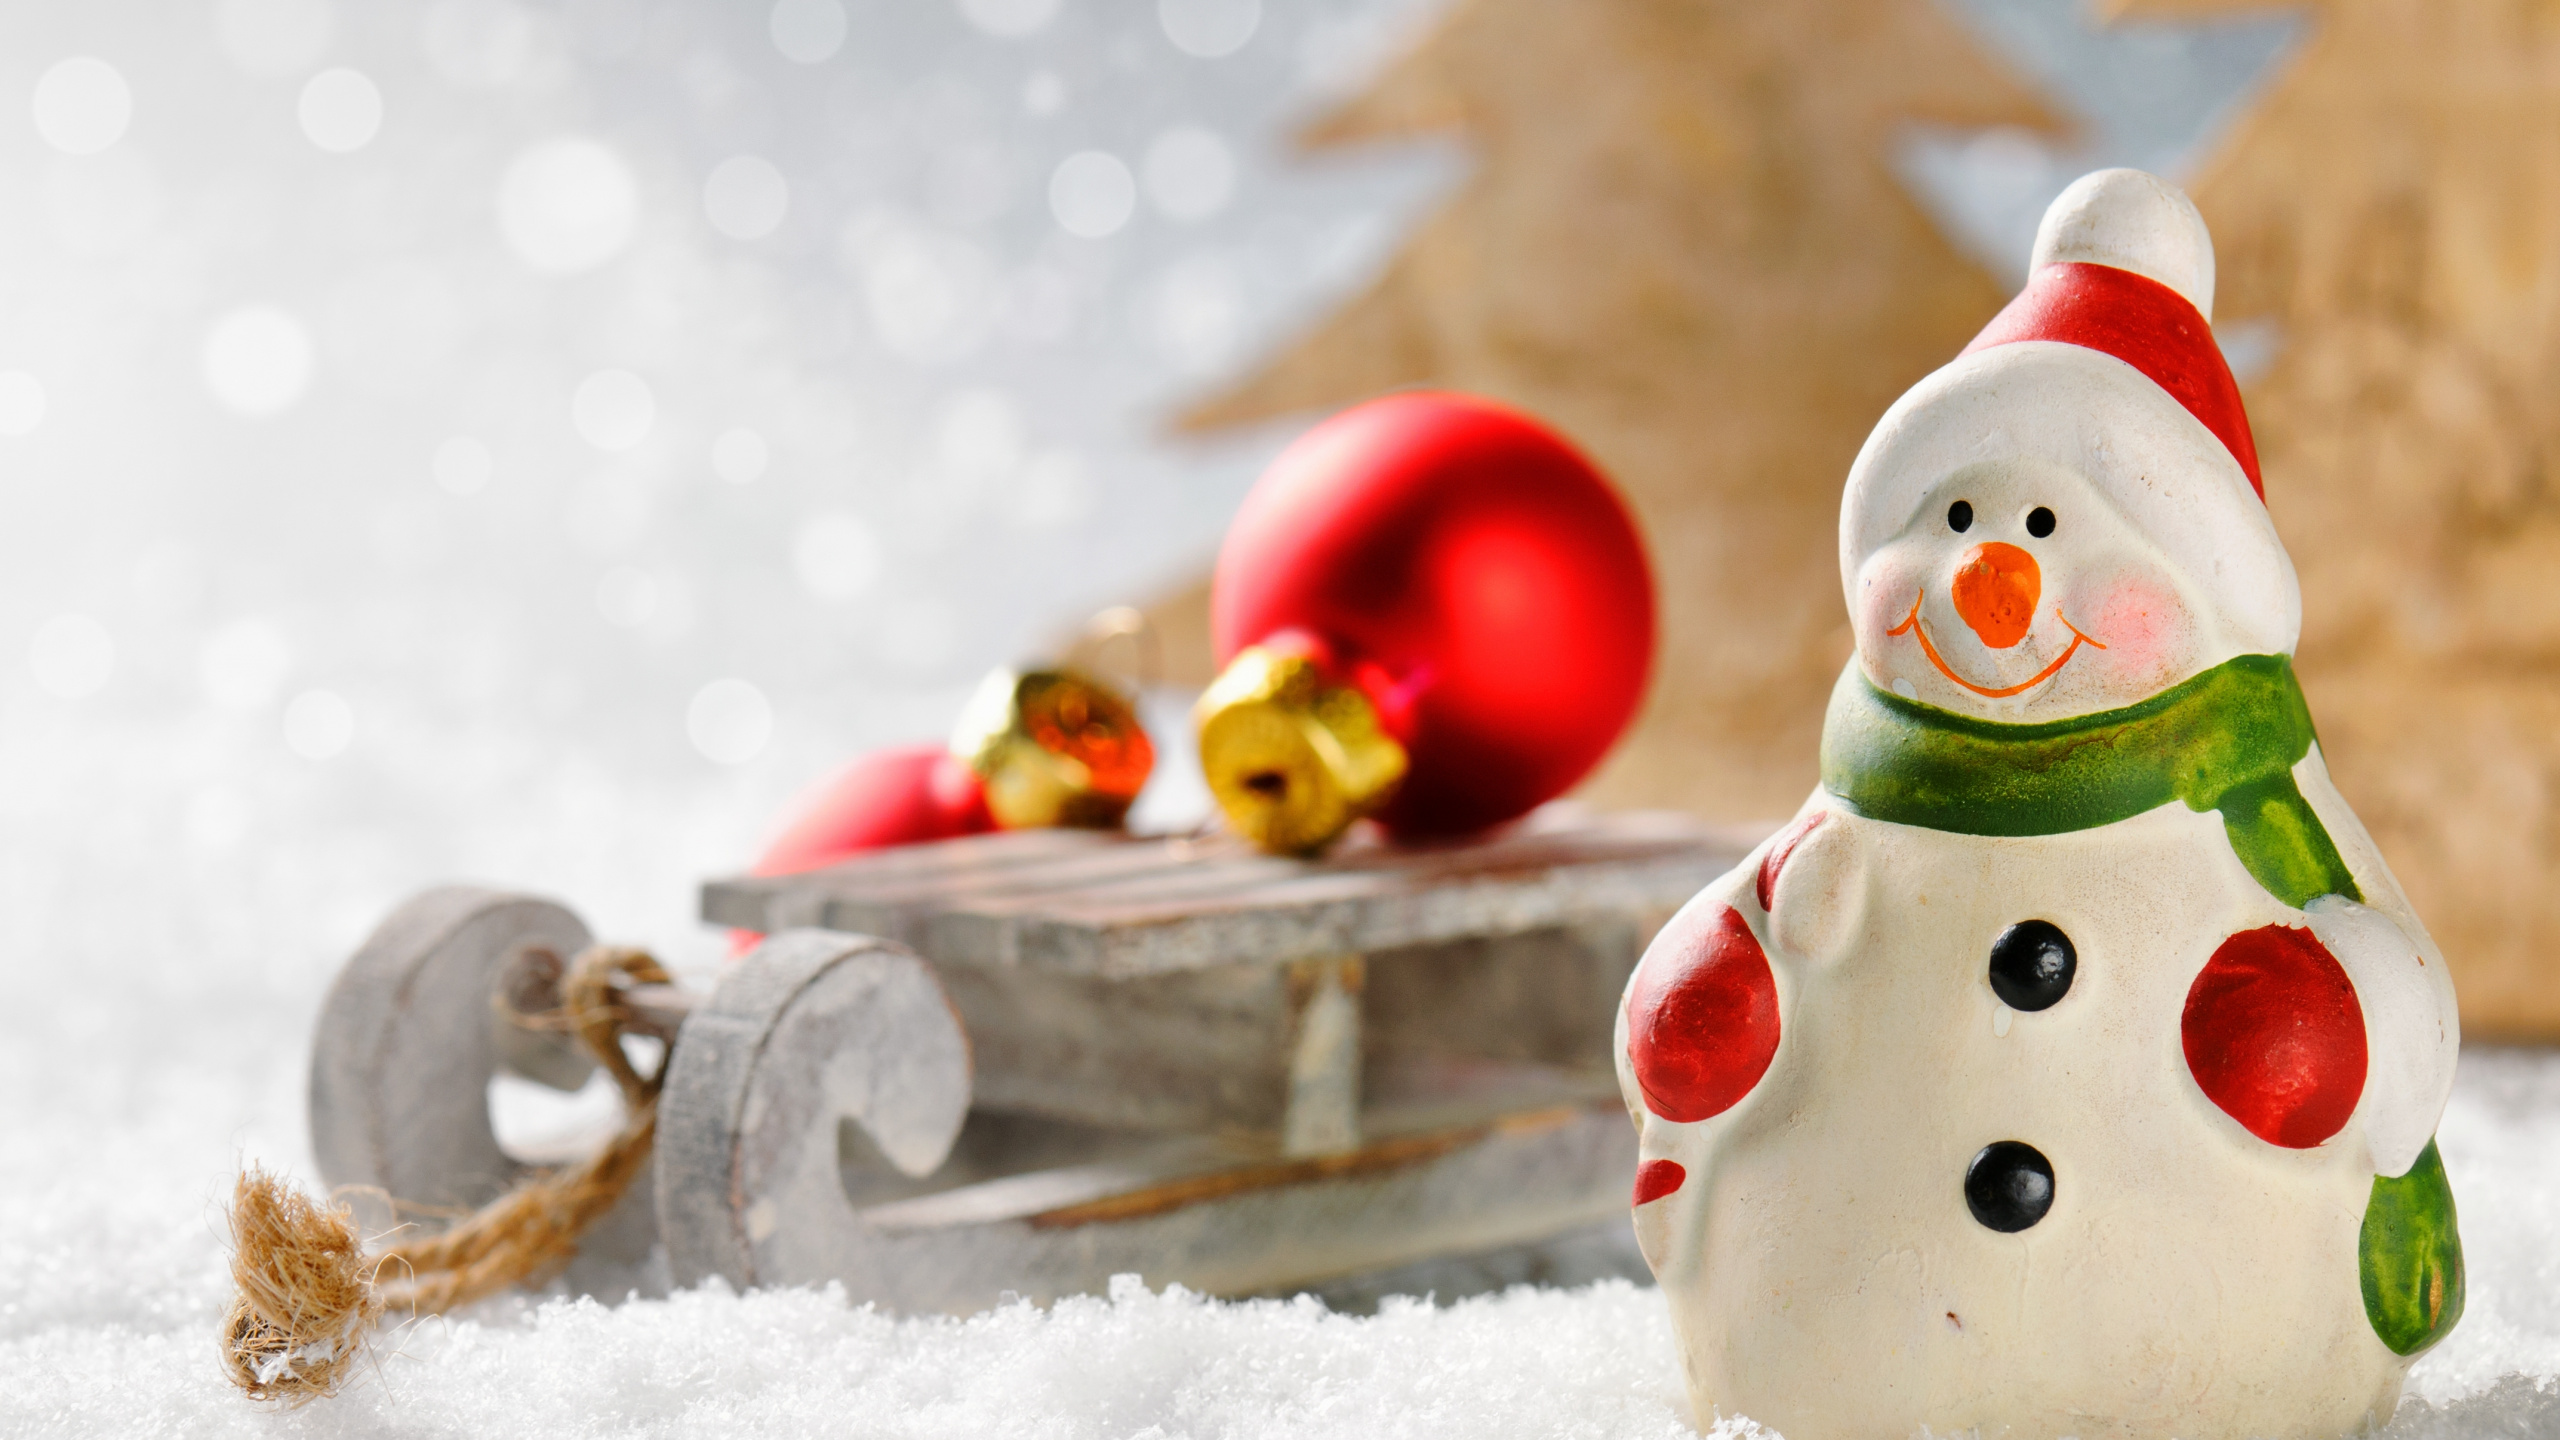 Christmas Day, Snowman, Holiday, Snow, Santa Claus. Wallpaper in 2560x1440 Resolution